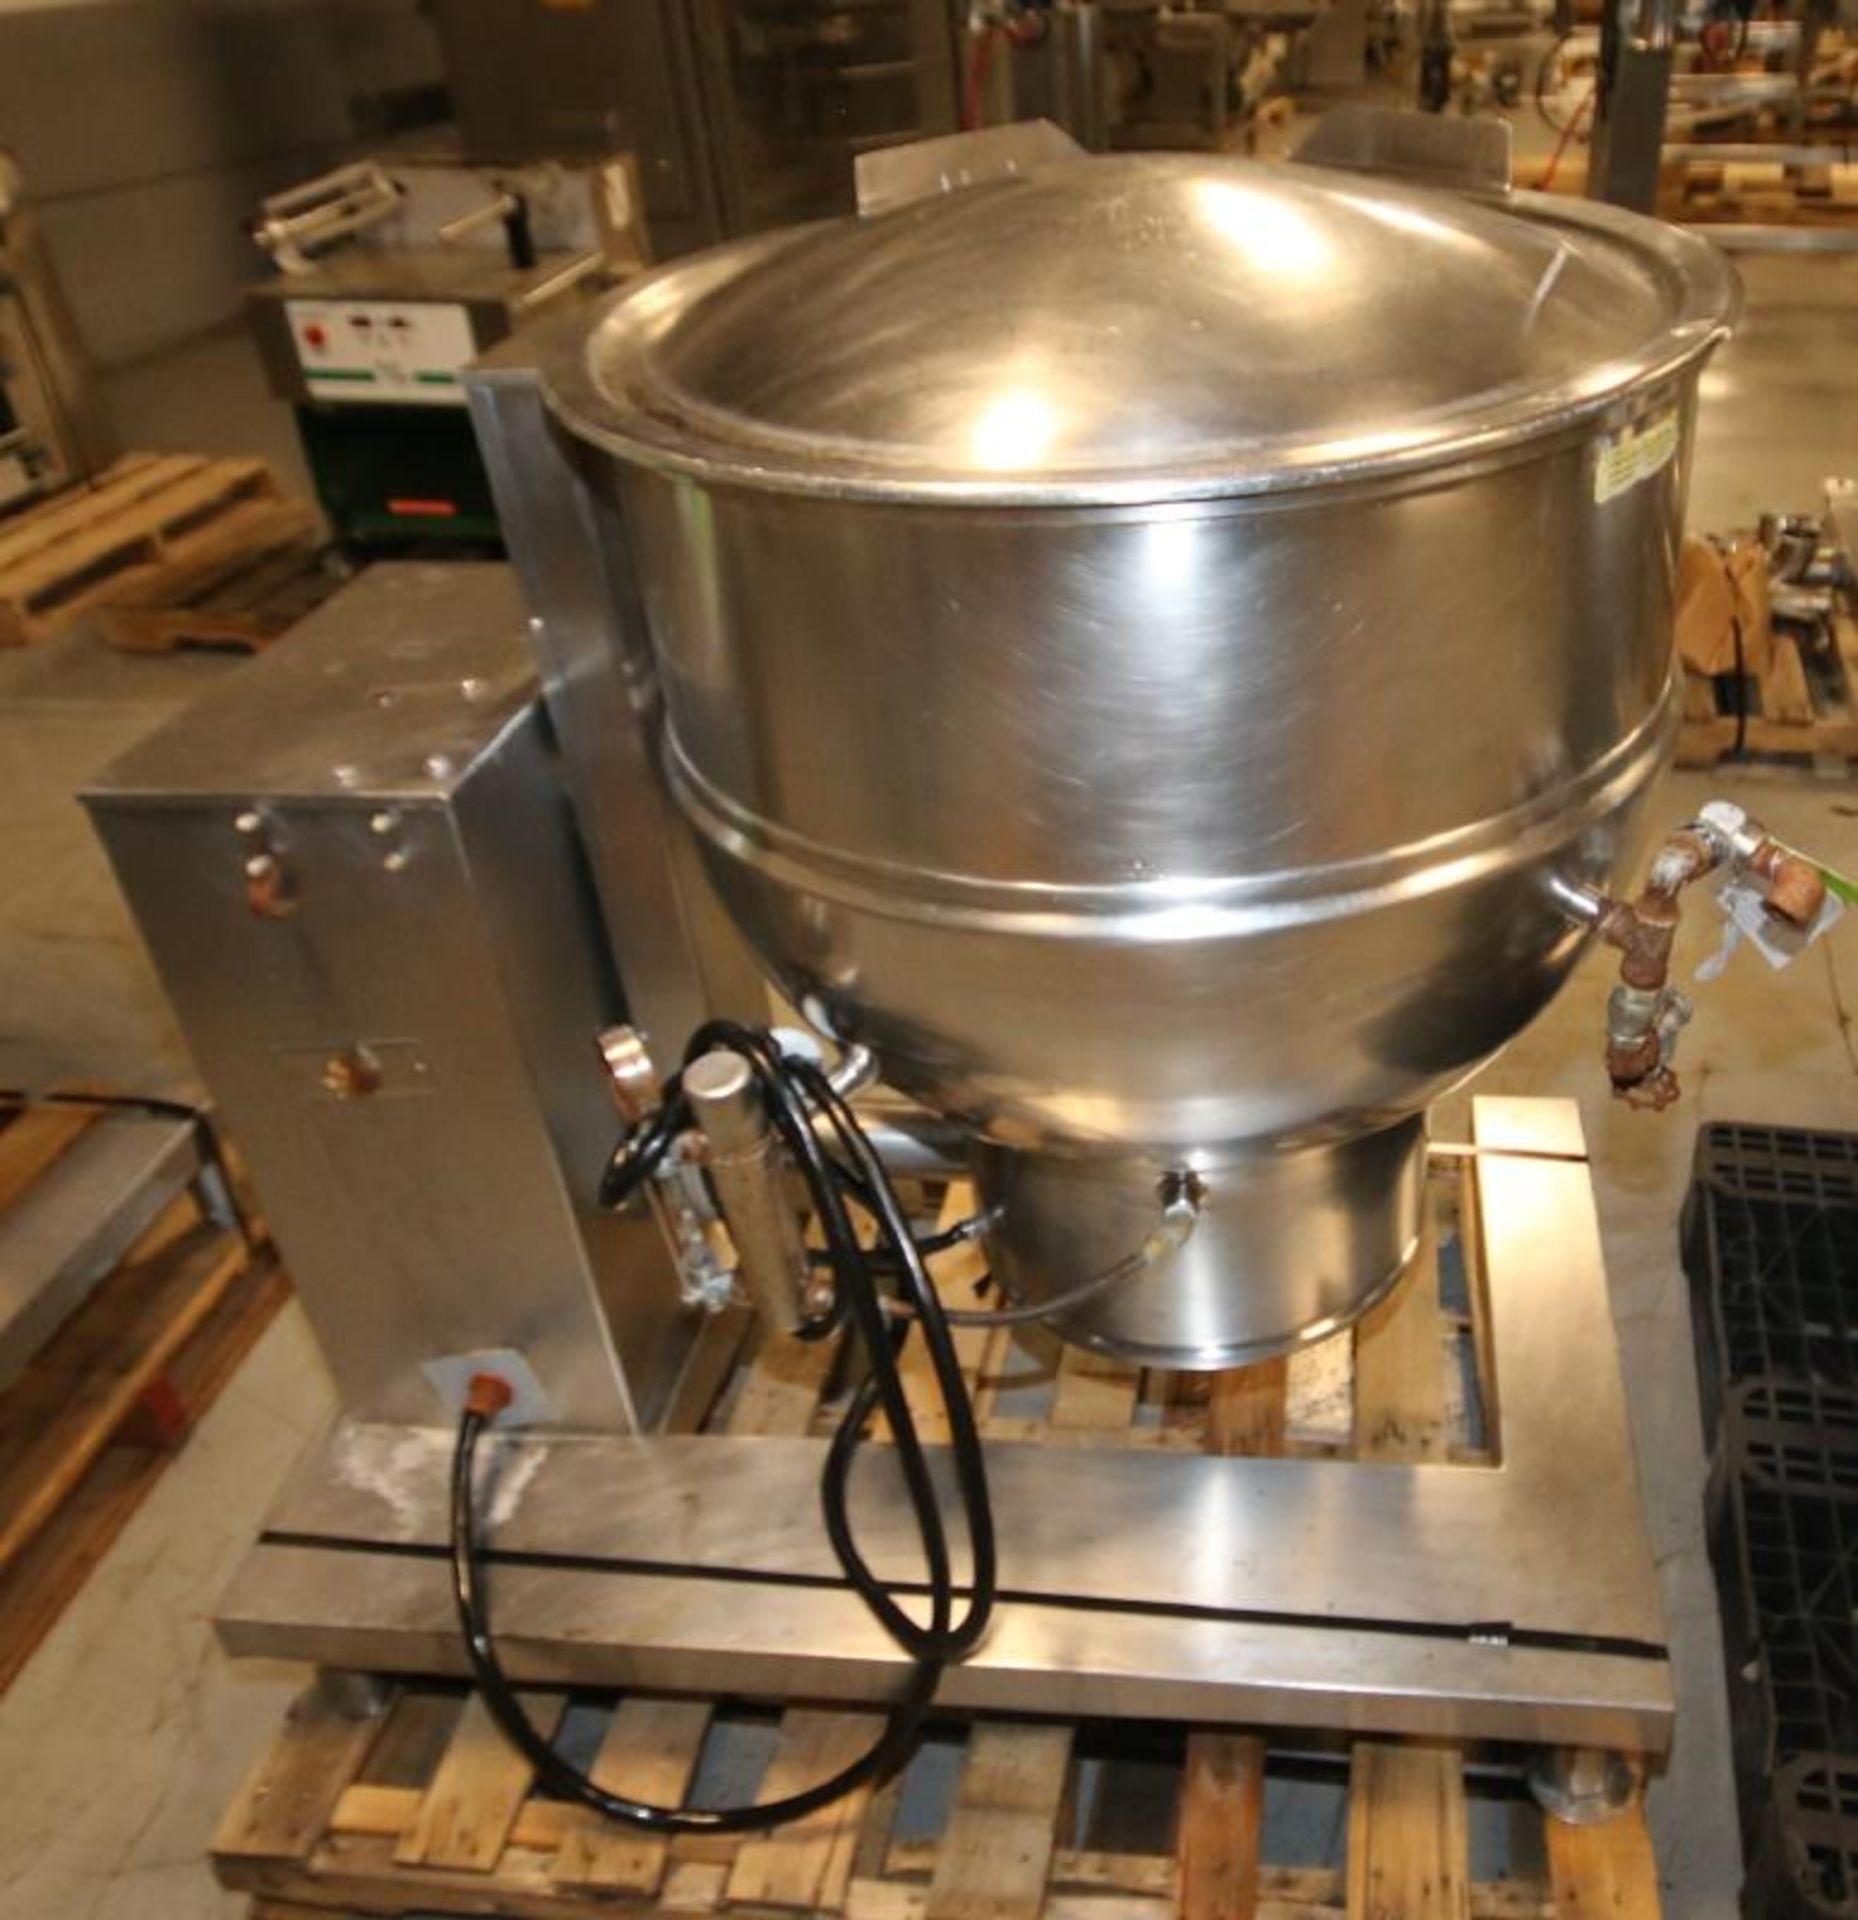 Groen 60 Gal. Tilt Kettle, Model DEE/4T-60, S/N 37173, Jacketed Rated @ 50 PSI @ 300 Degree F (Asset - Image 4 of 7